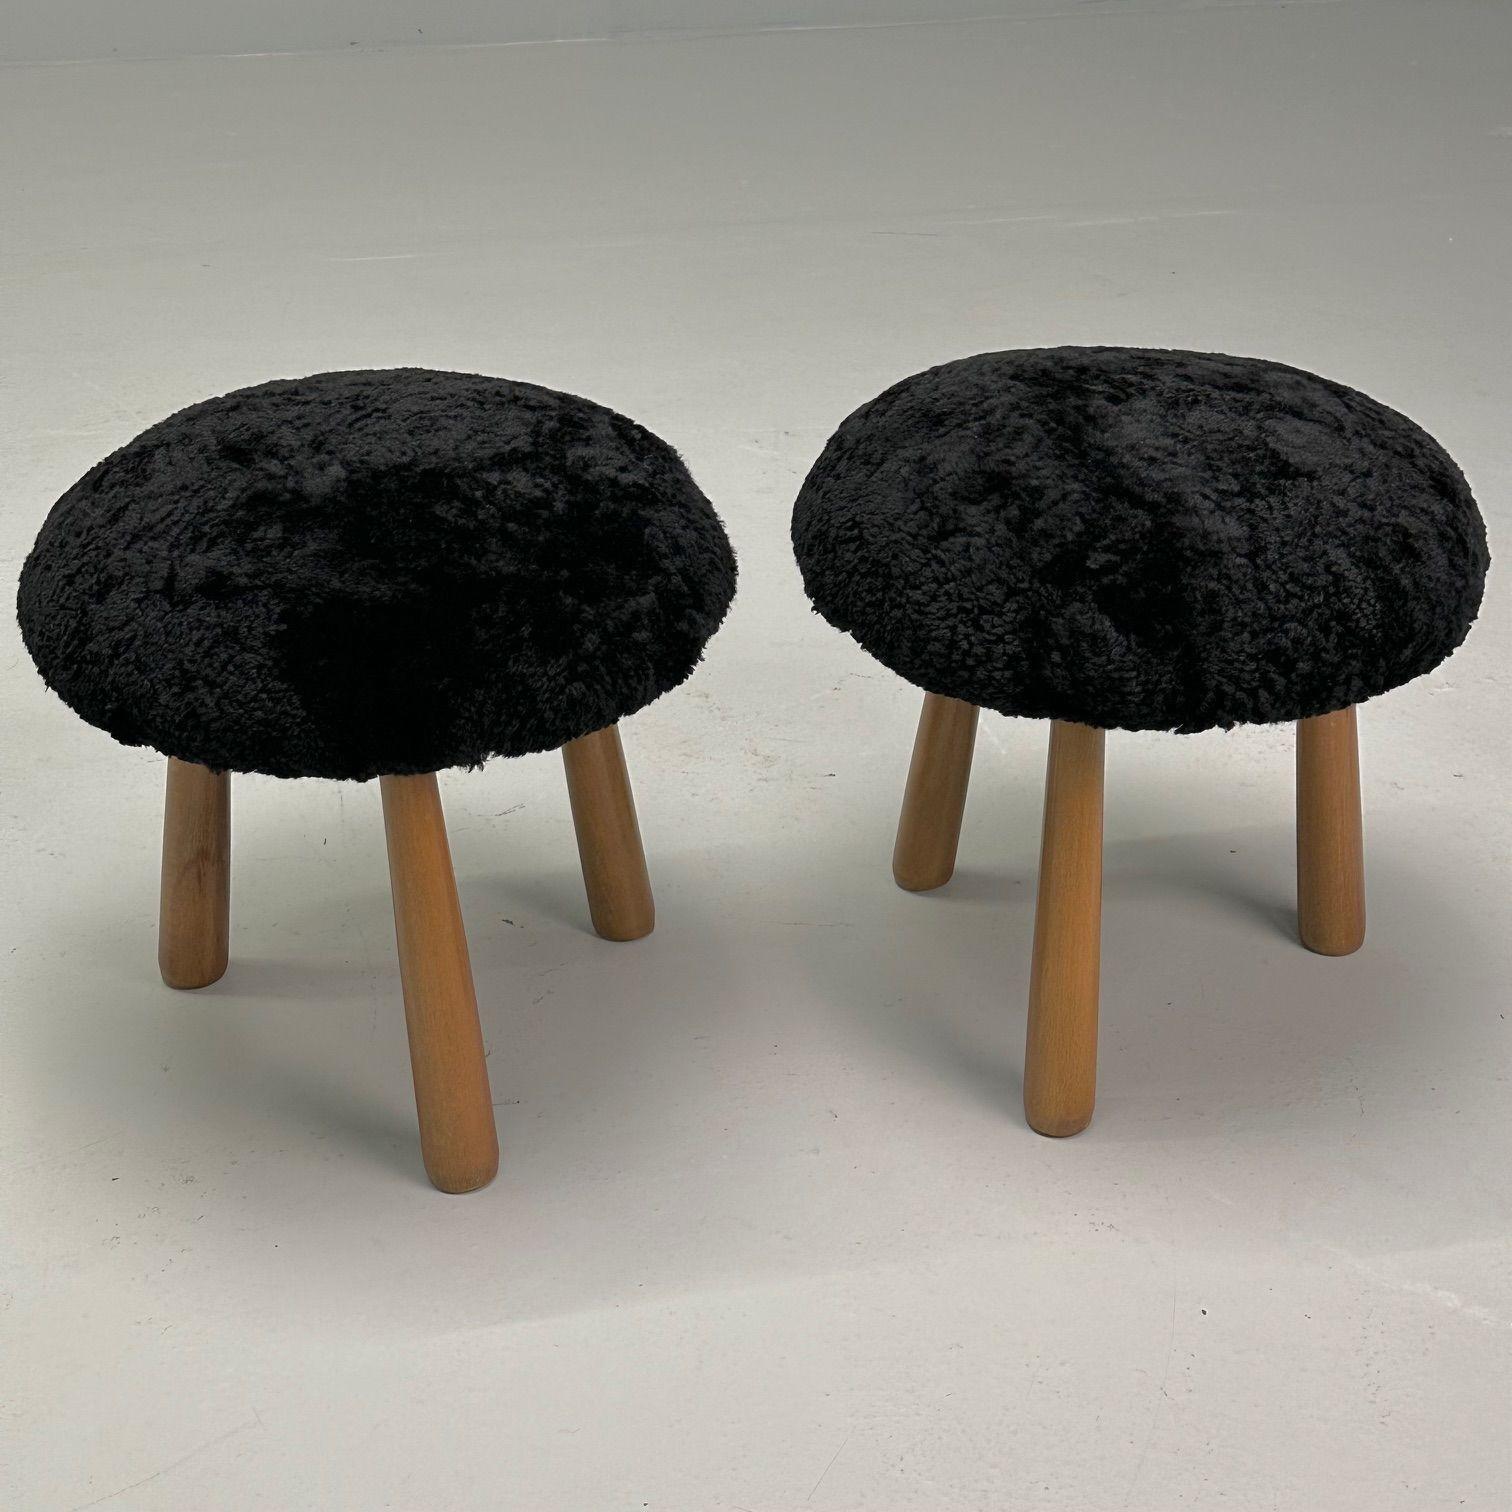 Contemporary, Swedish Mid-Century Style, Tripod Stools, Black Sheepskin

Contemporary organic form tri-pod stools or ottomans. New, comfortable foam cushioning and high quality 17 mm curly black genuine Australian shearling. Overall form and design